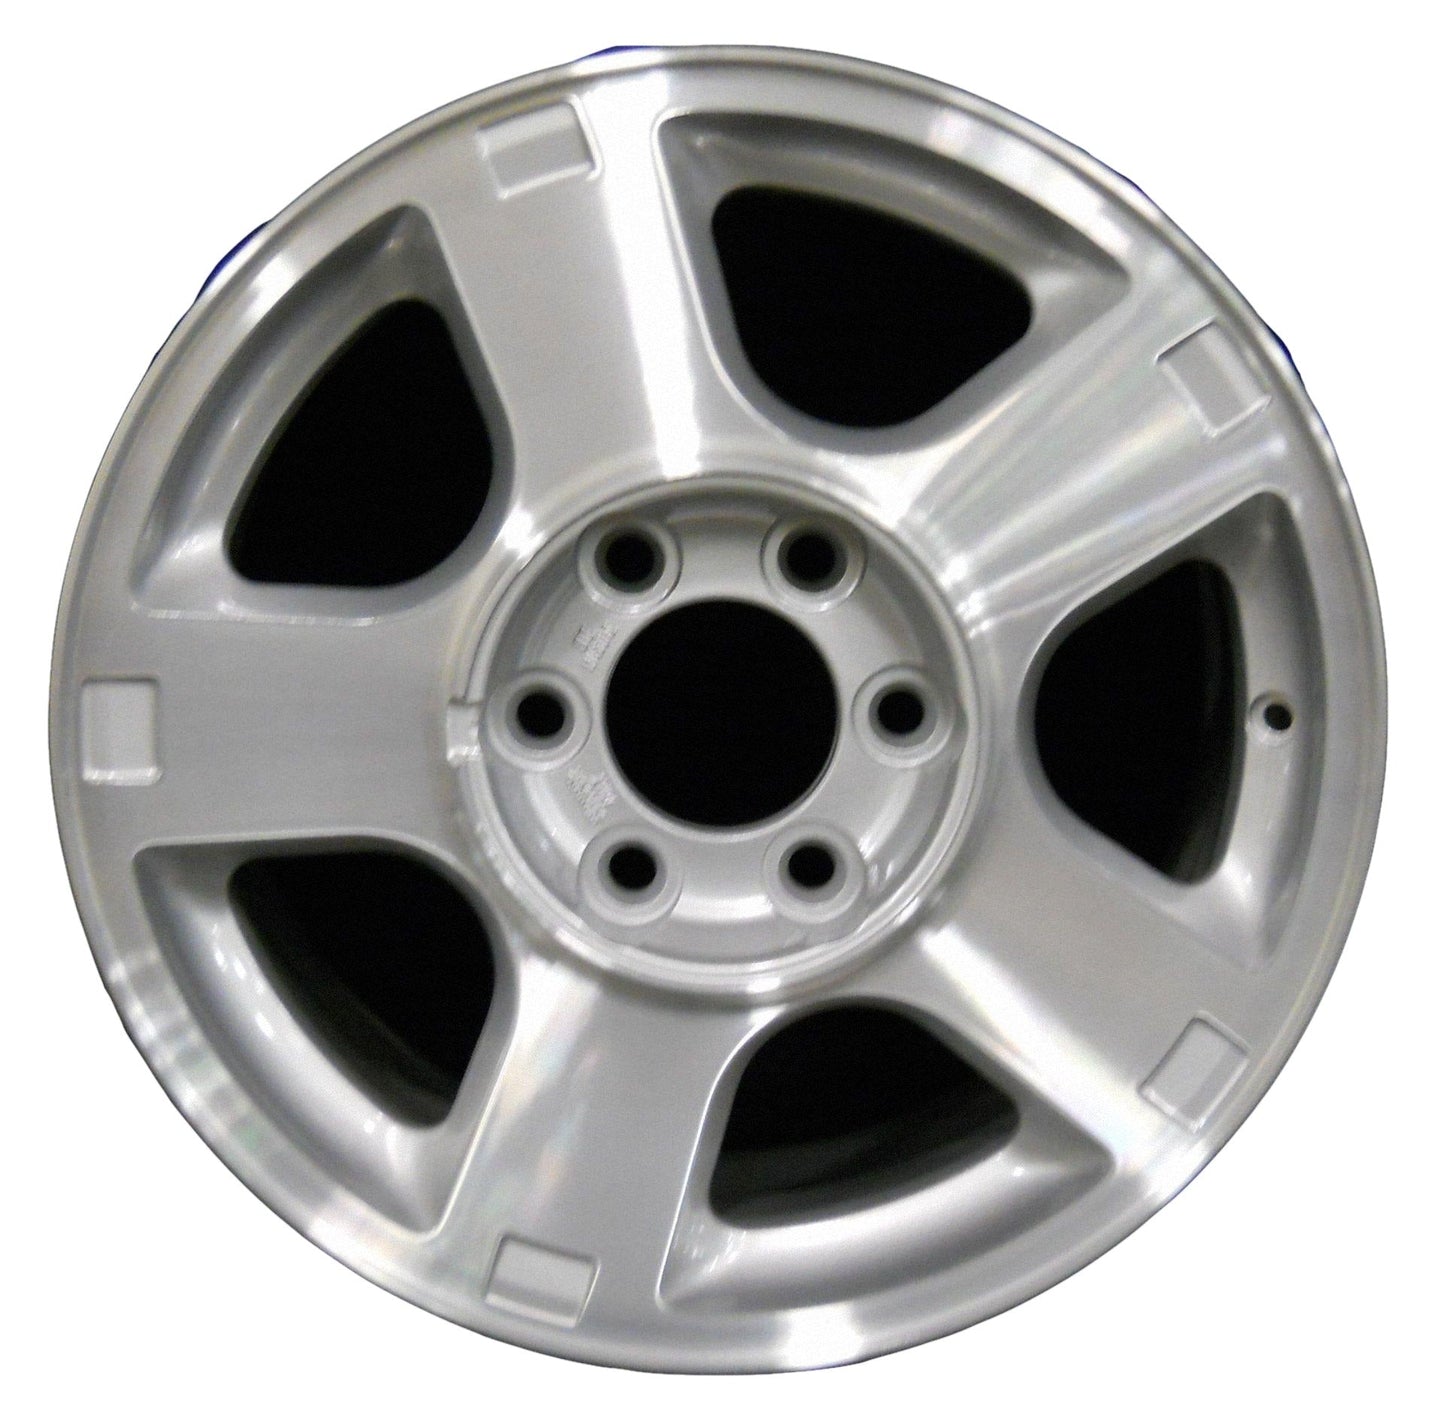 Ford Expedition  2007, 2008, 2009, 2010 Factory OEM Car Wheel Size 17x8 Alloy WAO.3660.PS01.MA